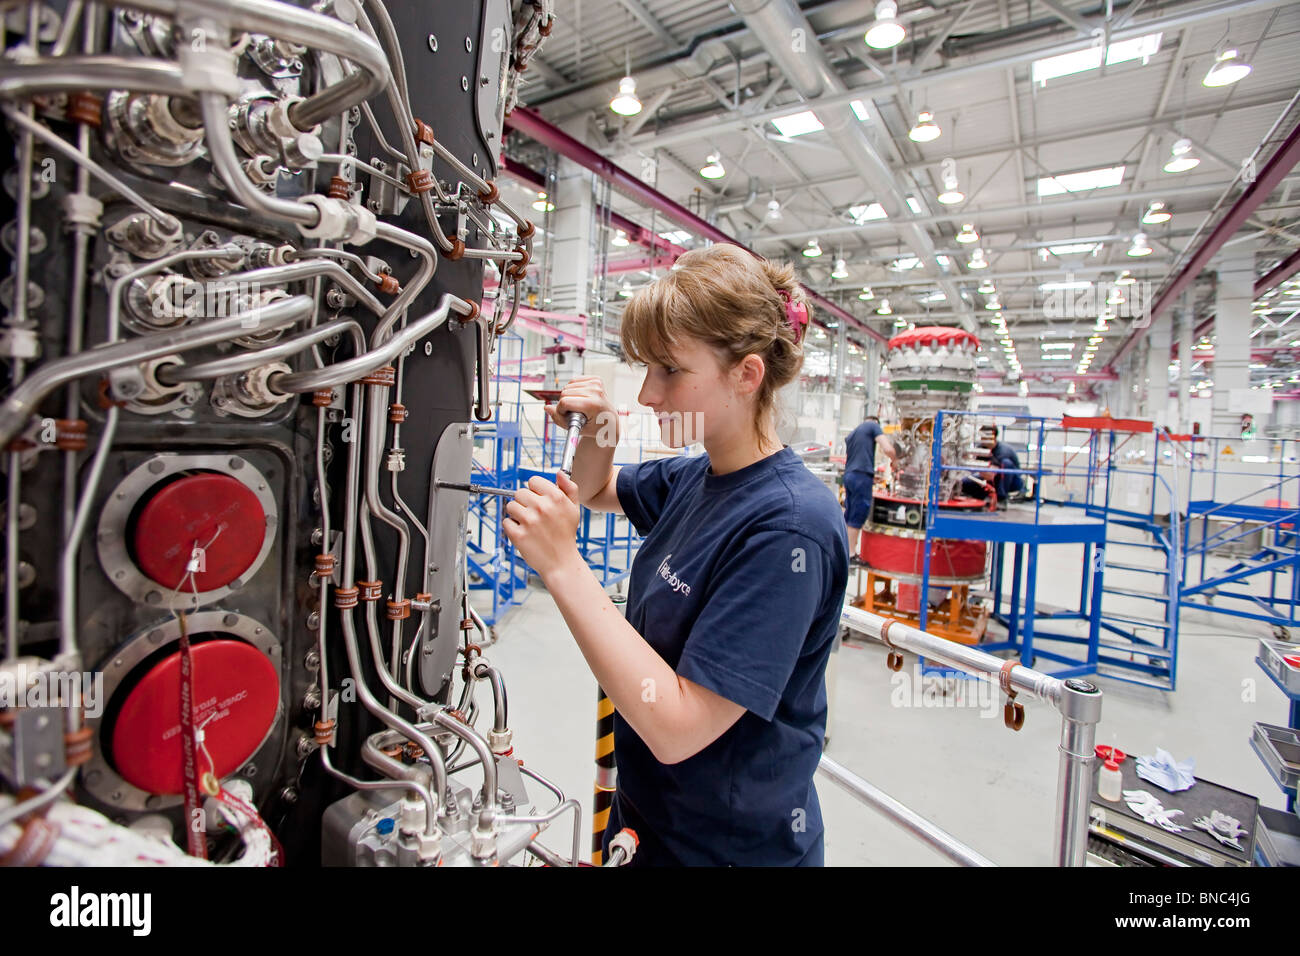 Rolls-Royce production site of aircraft propulsion units in Germany Stock Photo